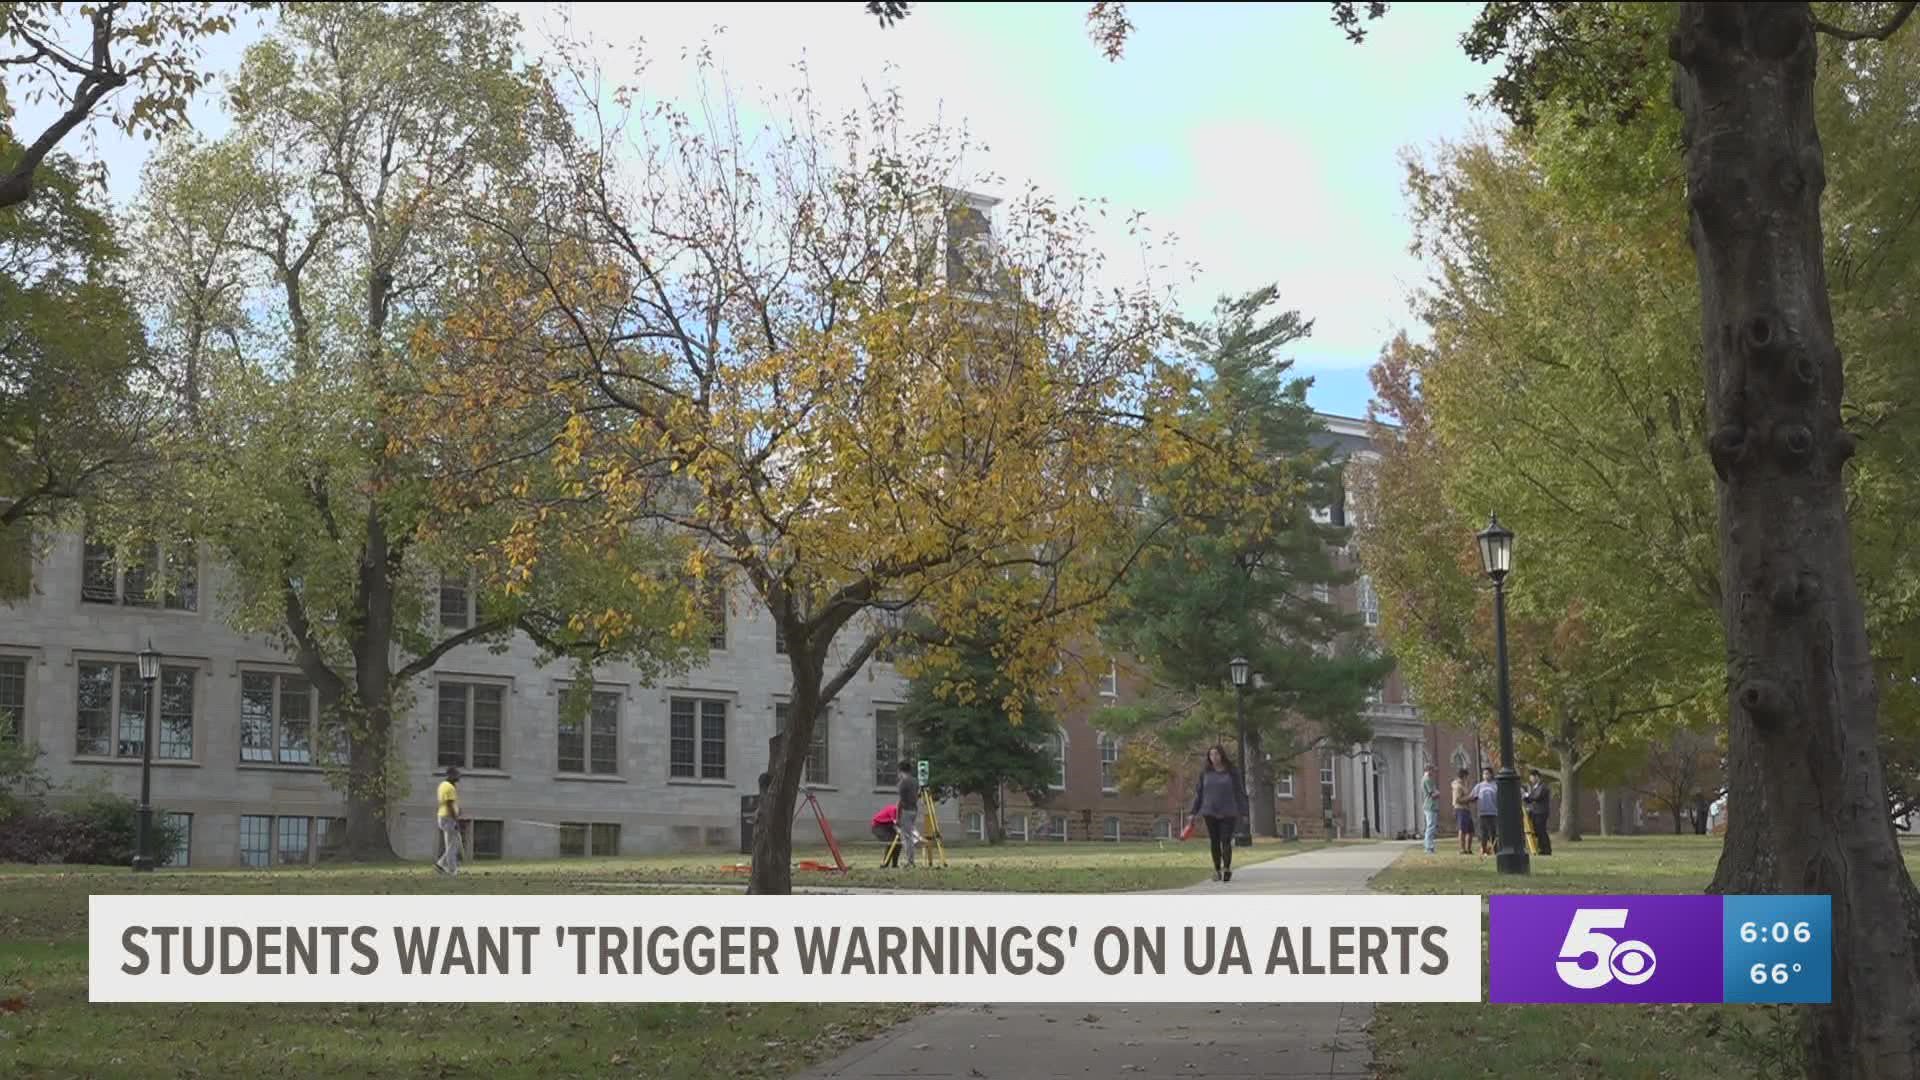 University of Arkansas students are requesting trigger warnings for campus alerts that are graphic.